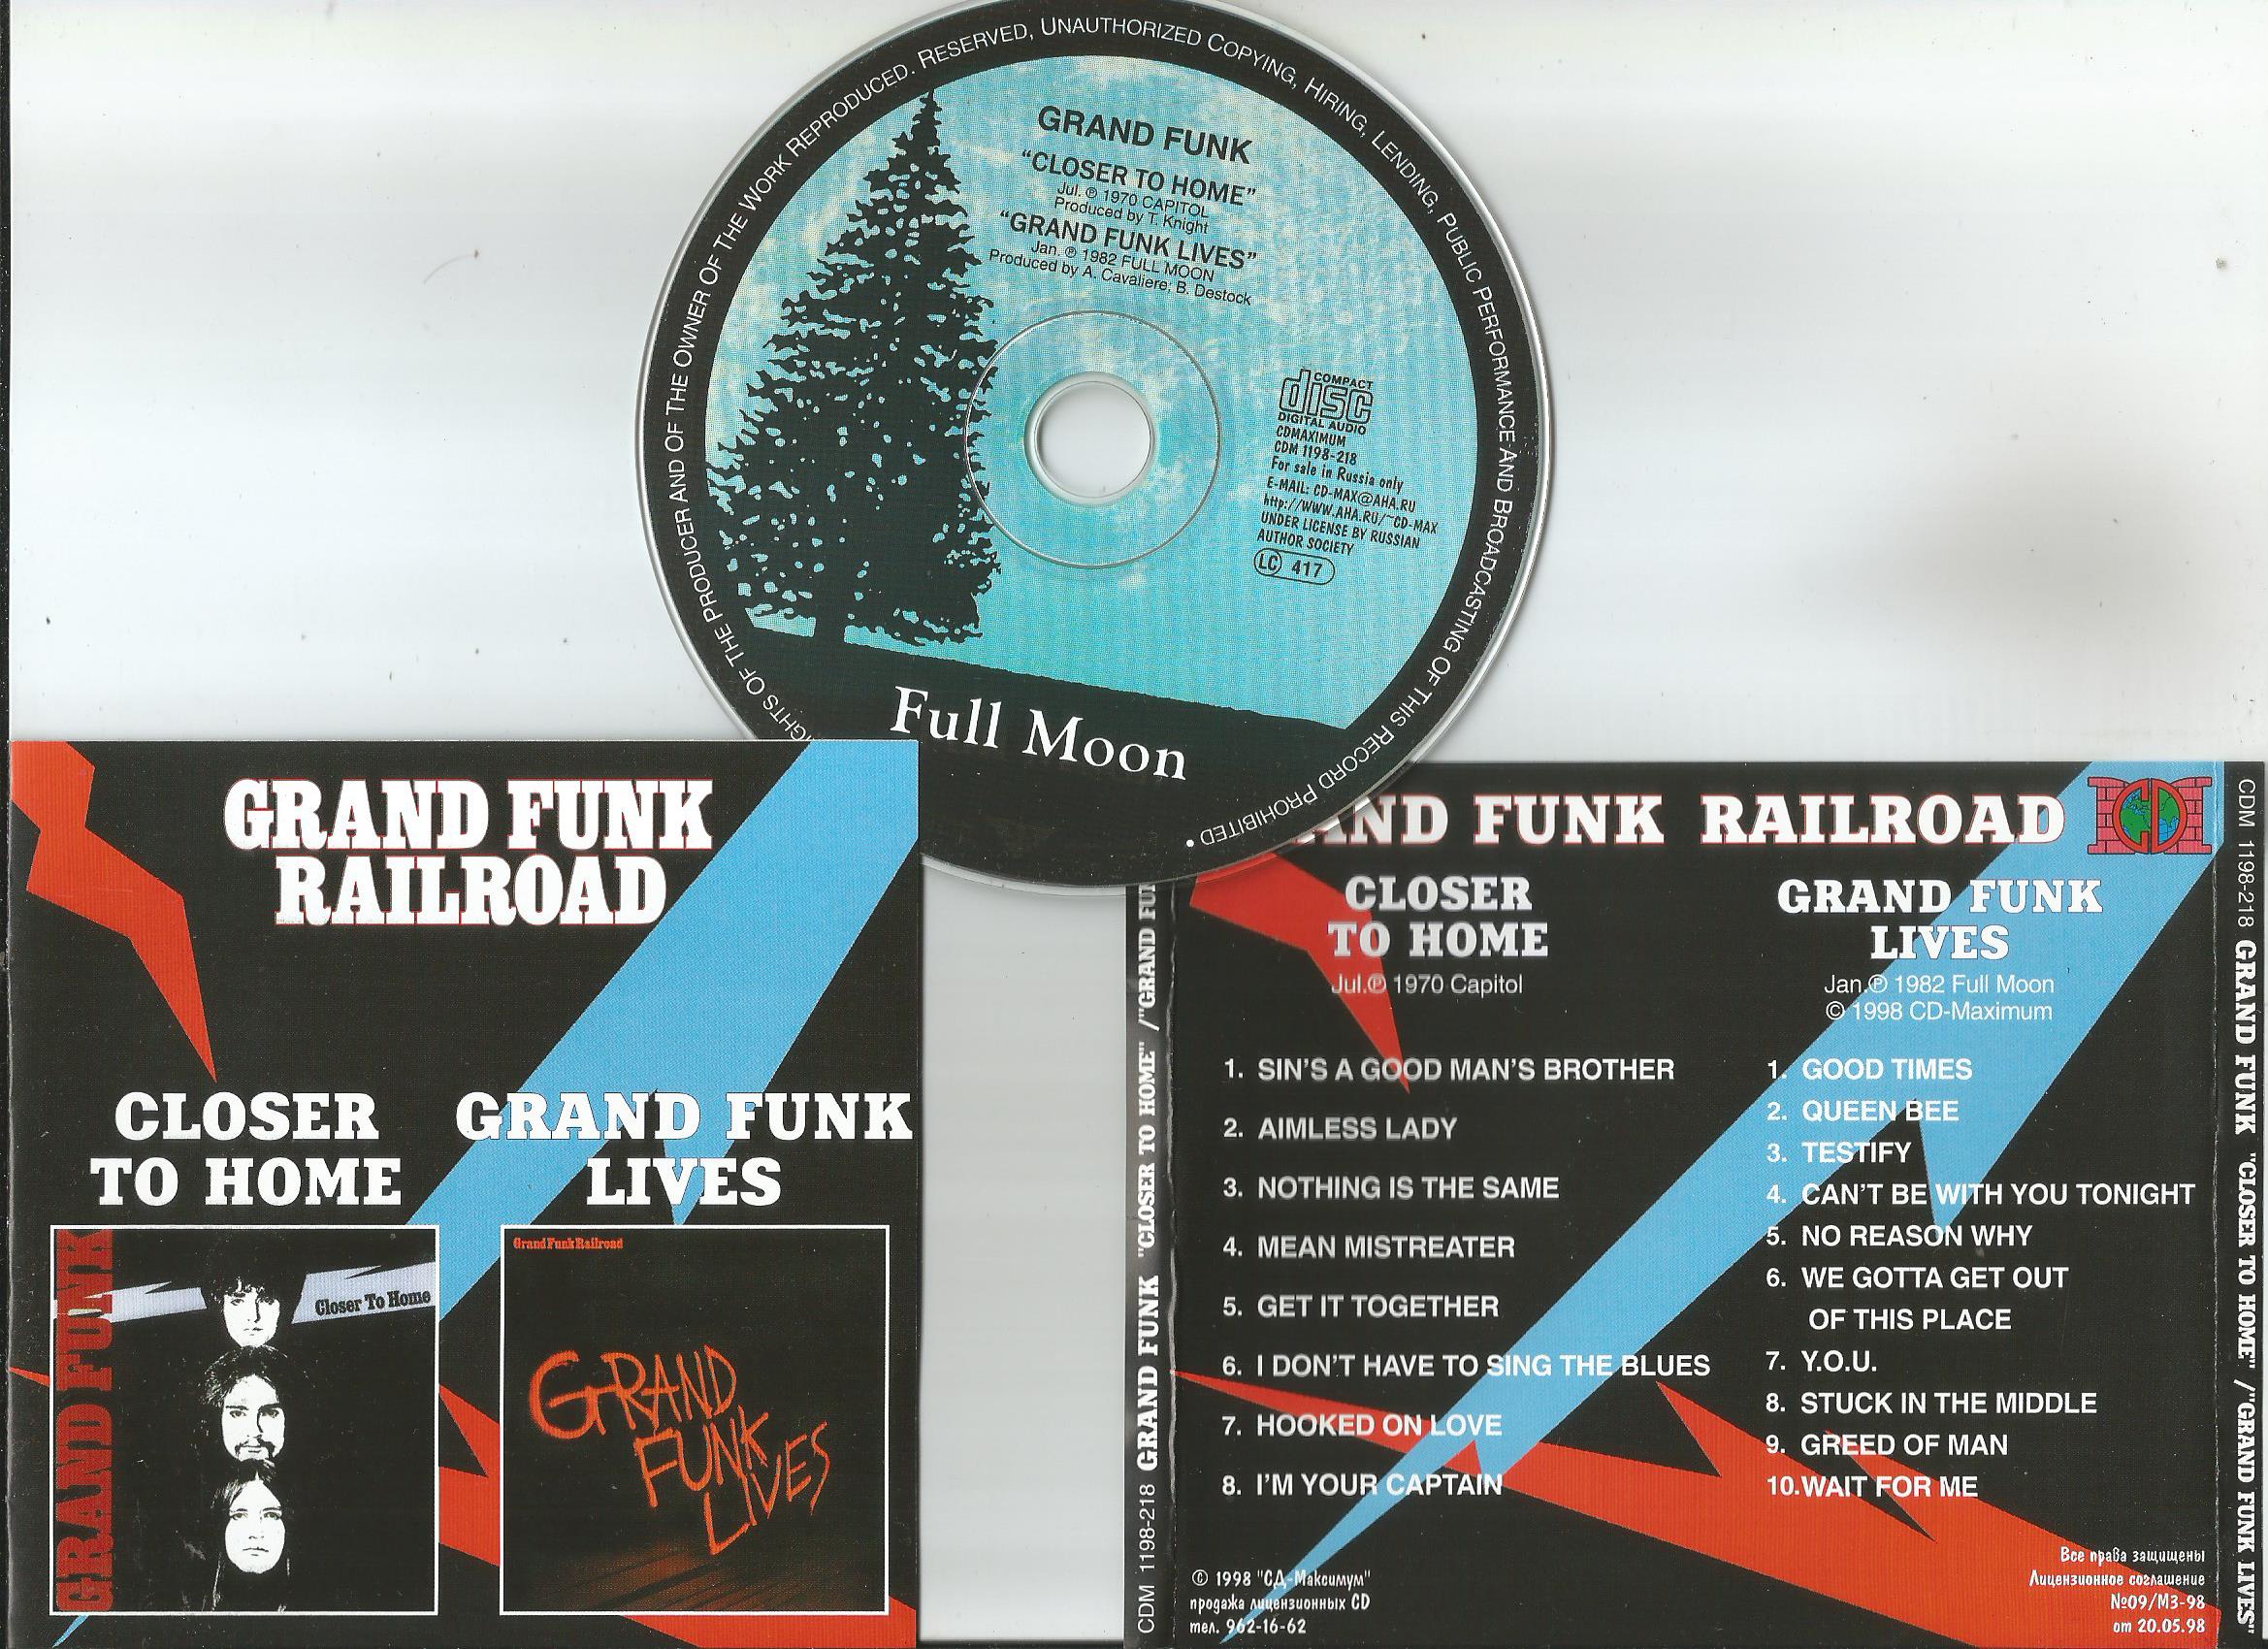 Closer to home. Grand Funk Railroad closer to Home. Grand Funk Lives. Closer to Home; Grand Funk Lives. Sin's a good man's brother (Grand Funk Railroad) с какого альбома.